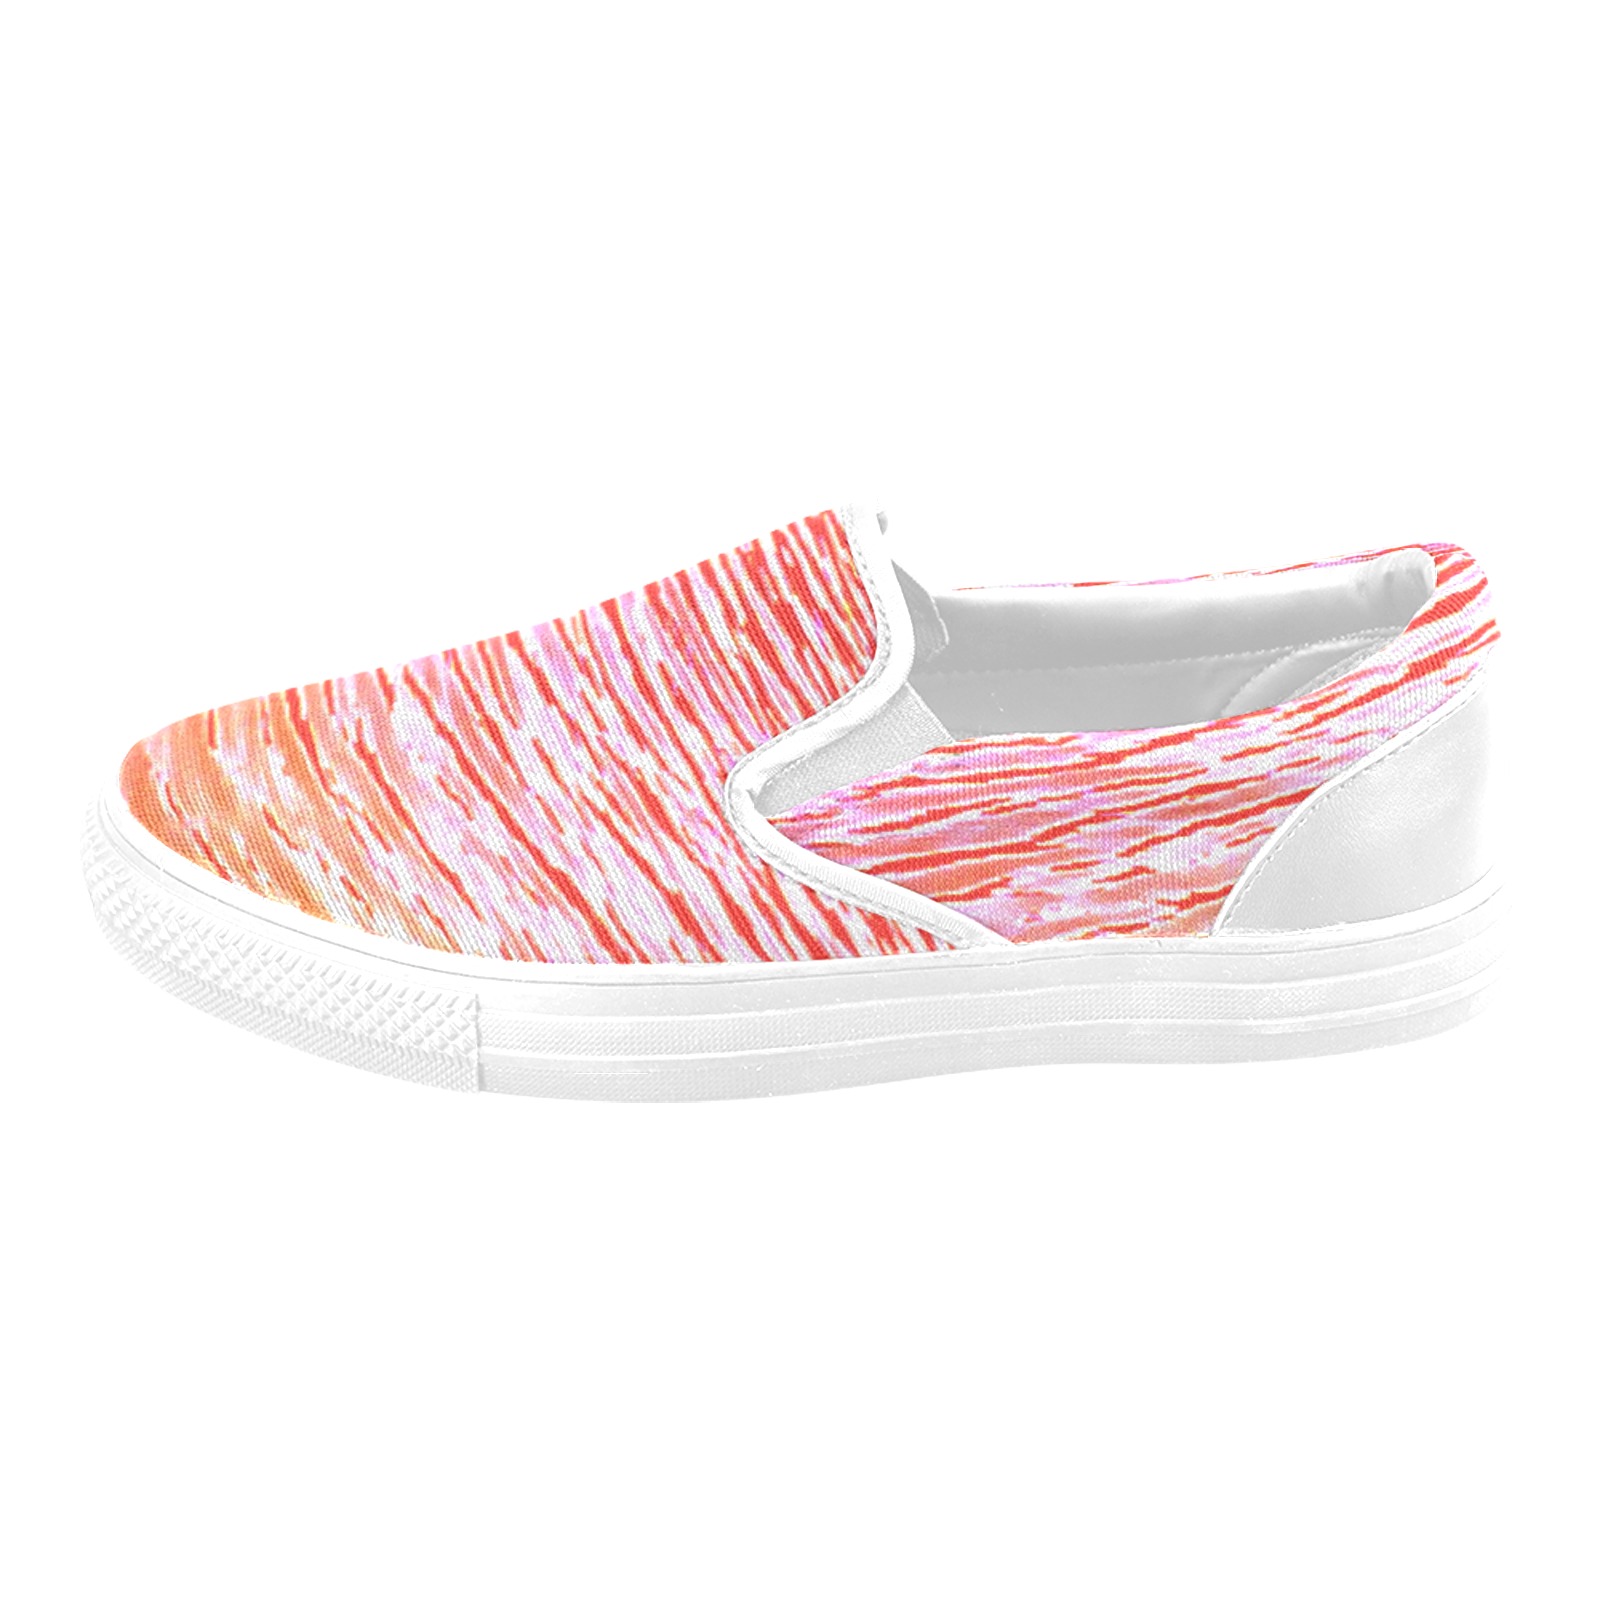 Orange and red water Men's Unusual Slip-on Canvas Shoes (Model 019)